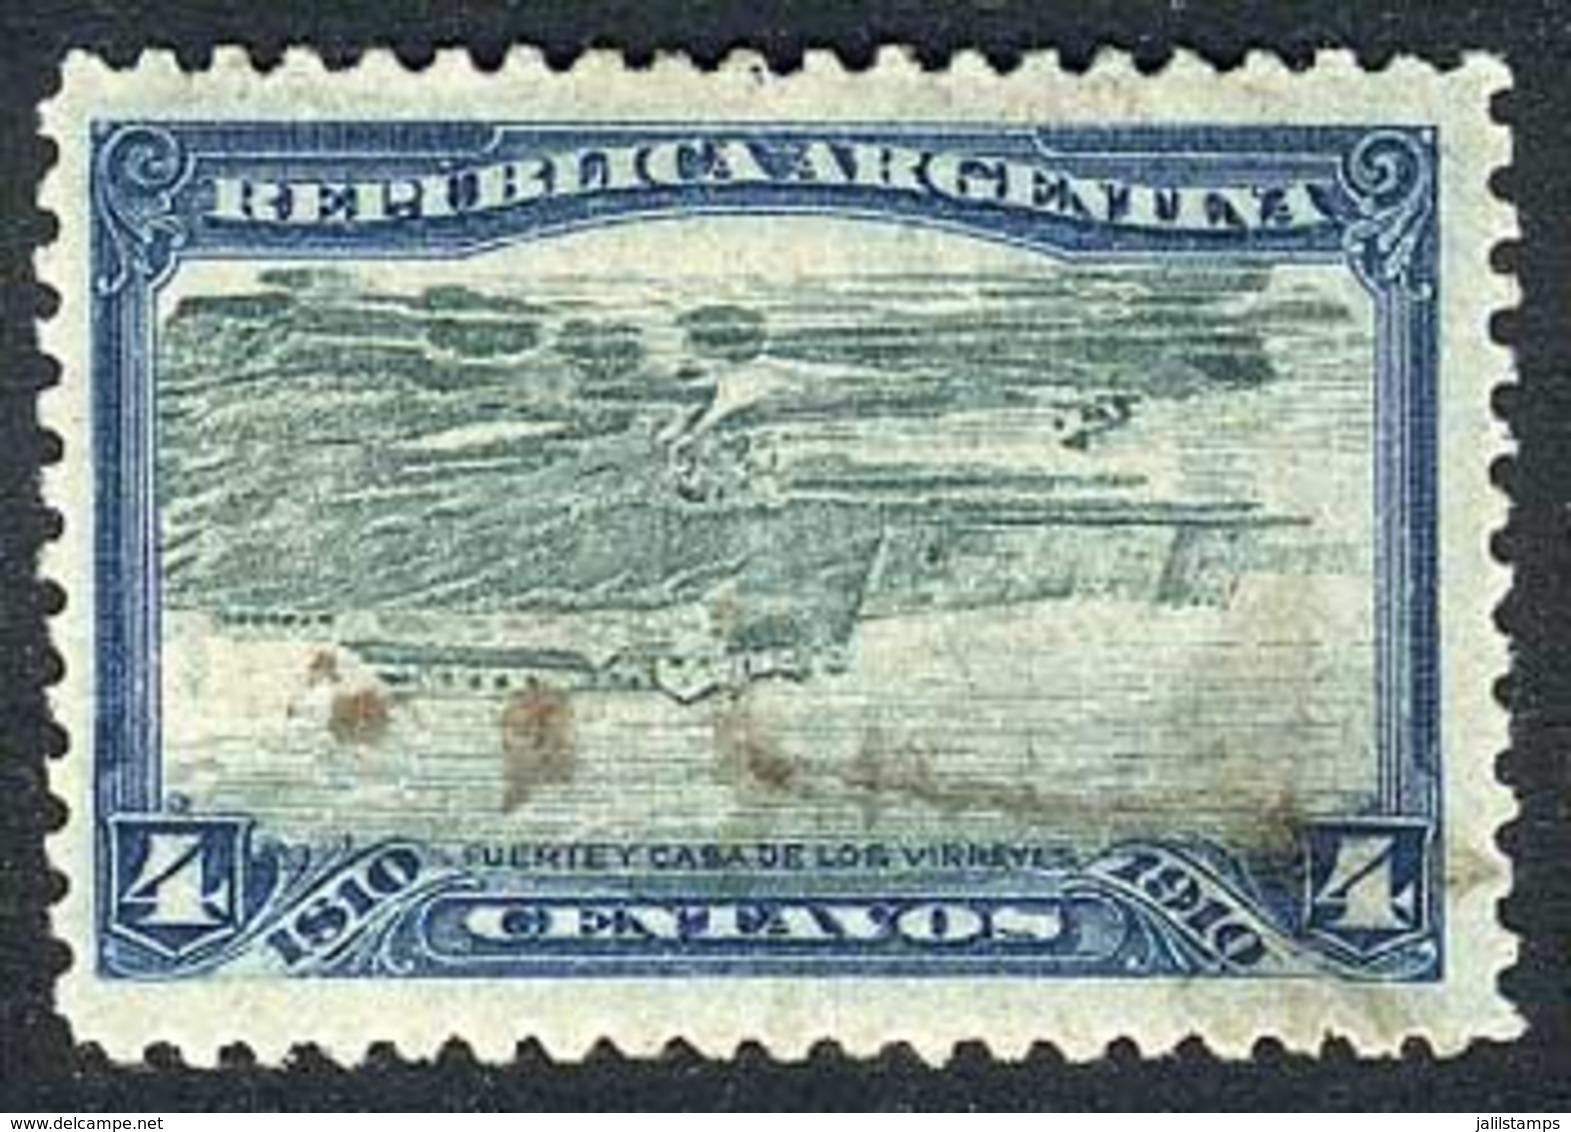 ARGENTINA: GJ.304CI, 1910 4c. Centenary Of Revolution, CENTER INVERTED Variety, With Defects And Repaired, Rare, Catalog - Used Stamps